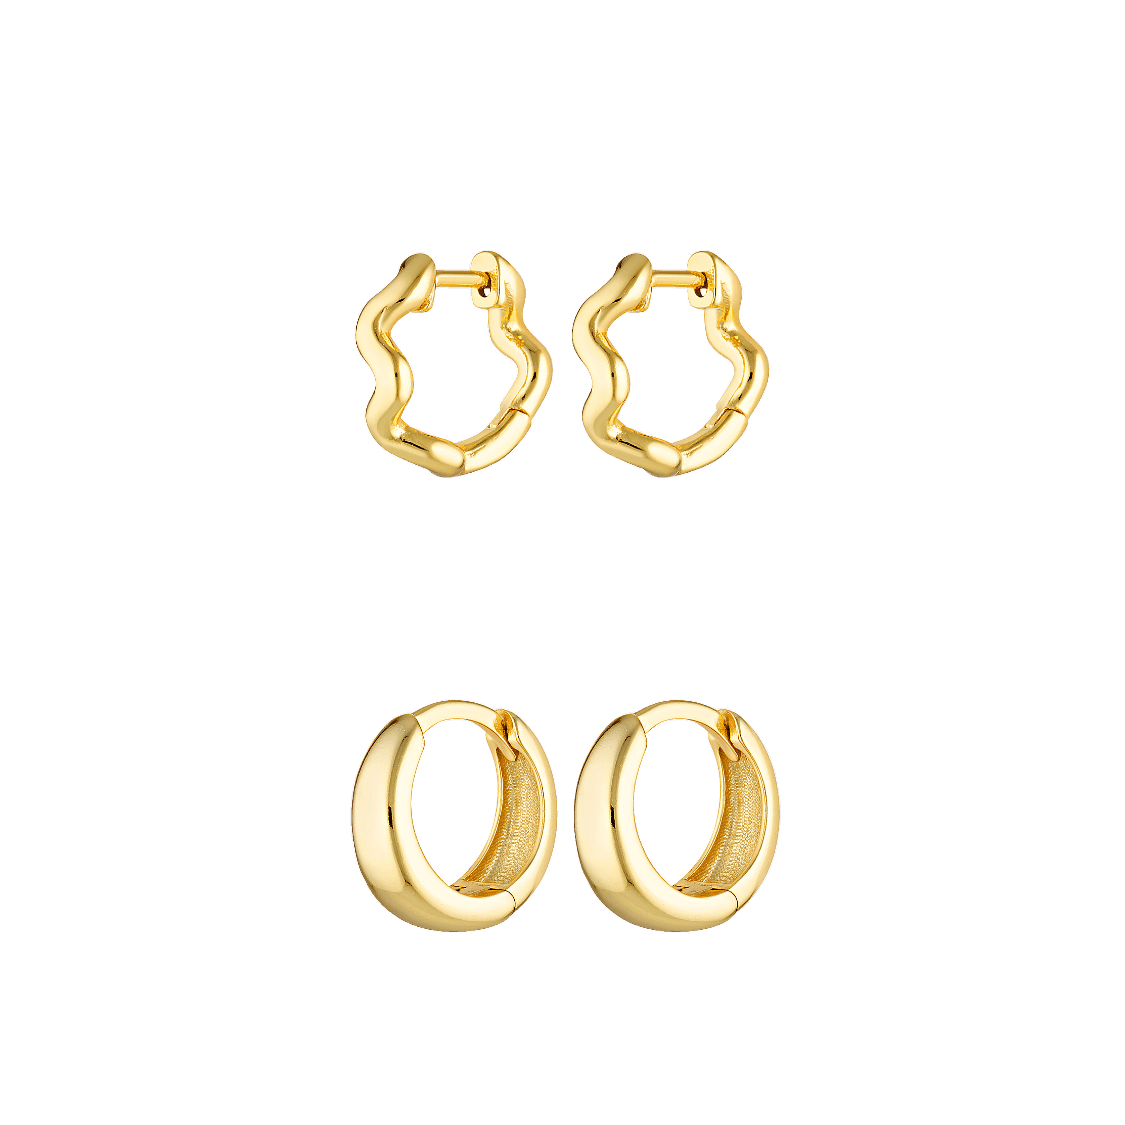 Small earring Stack of 18k gold fill Huggies 